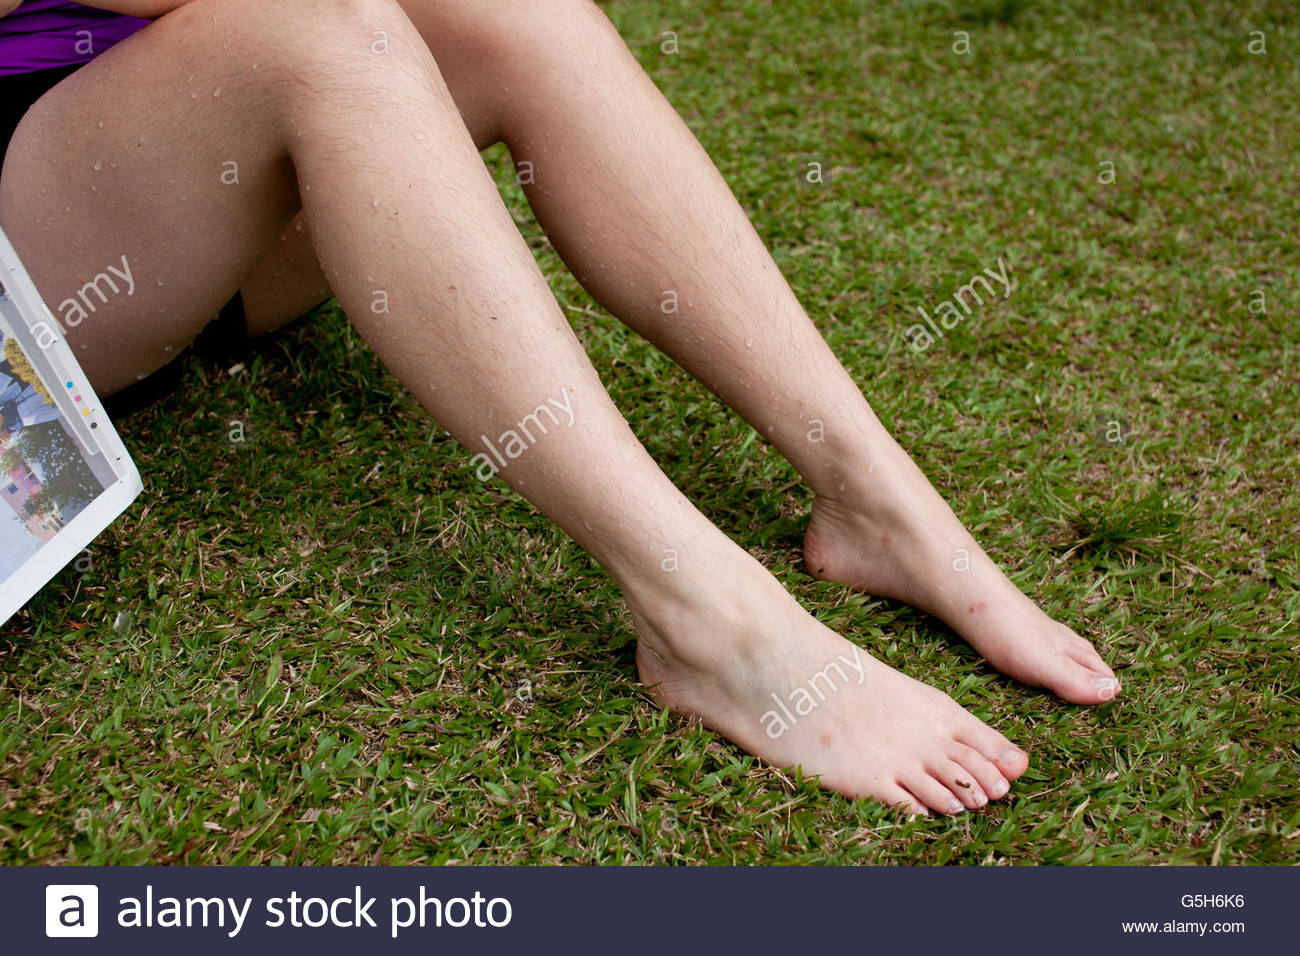 Women With Hairy Legs 14